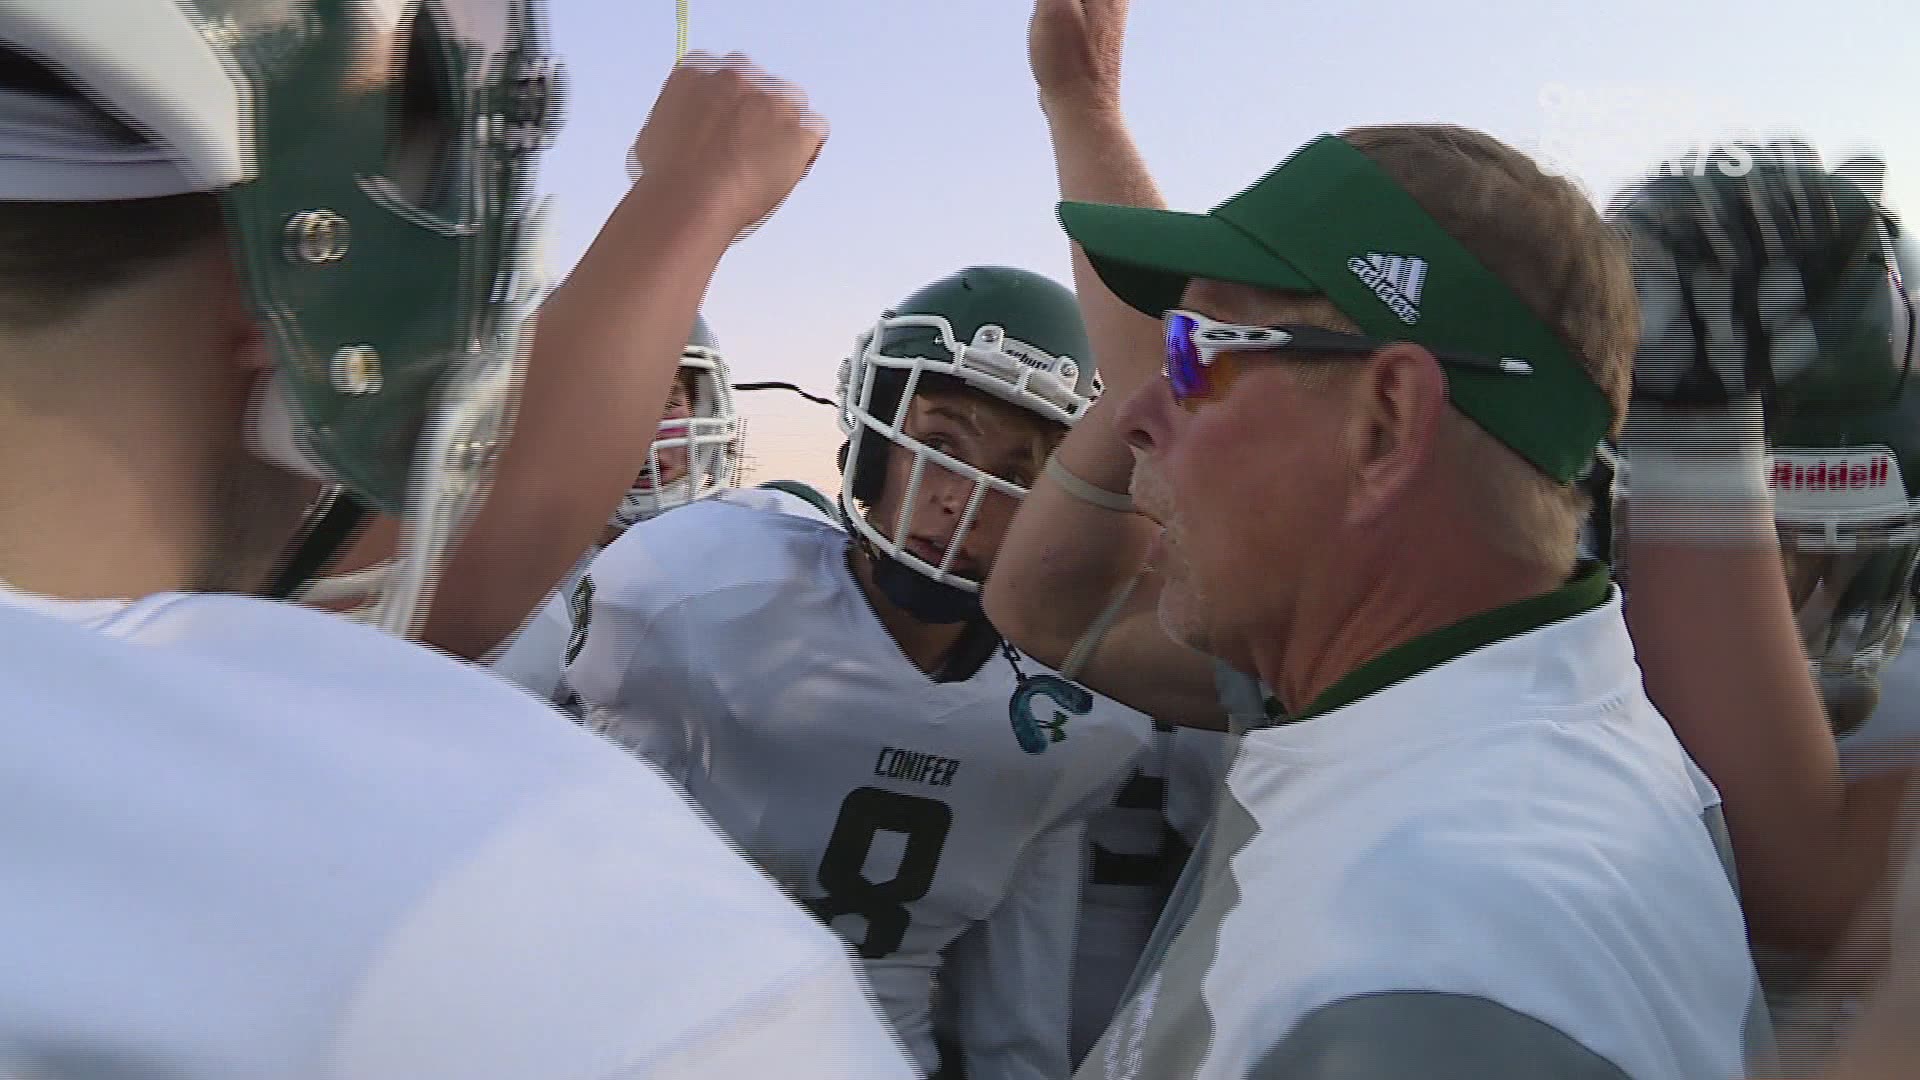 The Lobos posted an emphatic 48-0 win over the Wolverines Friday night.